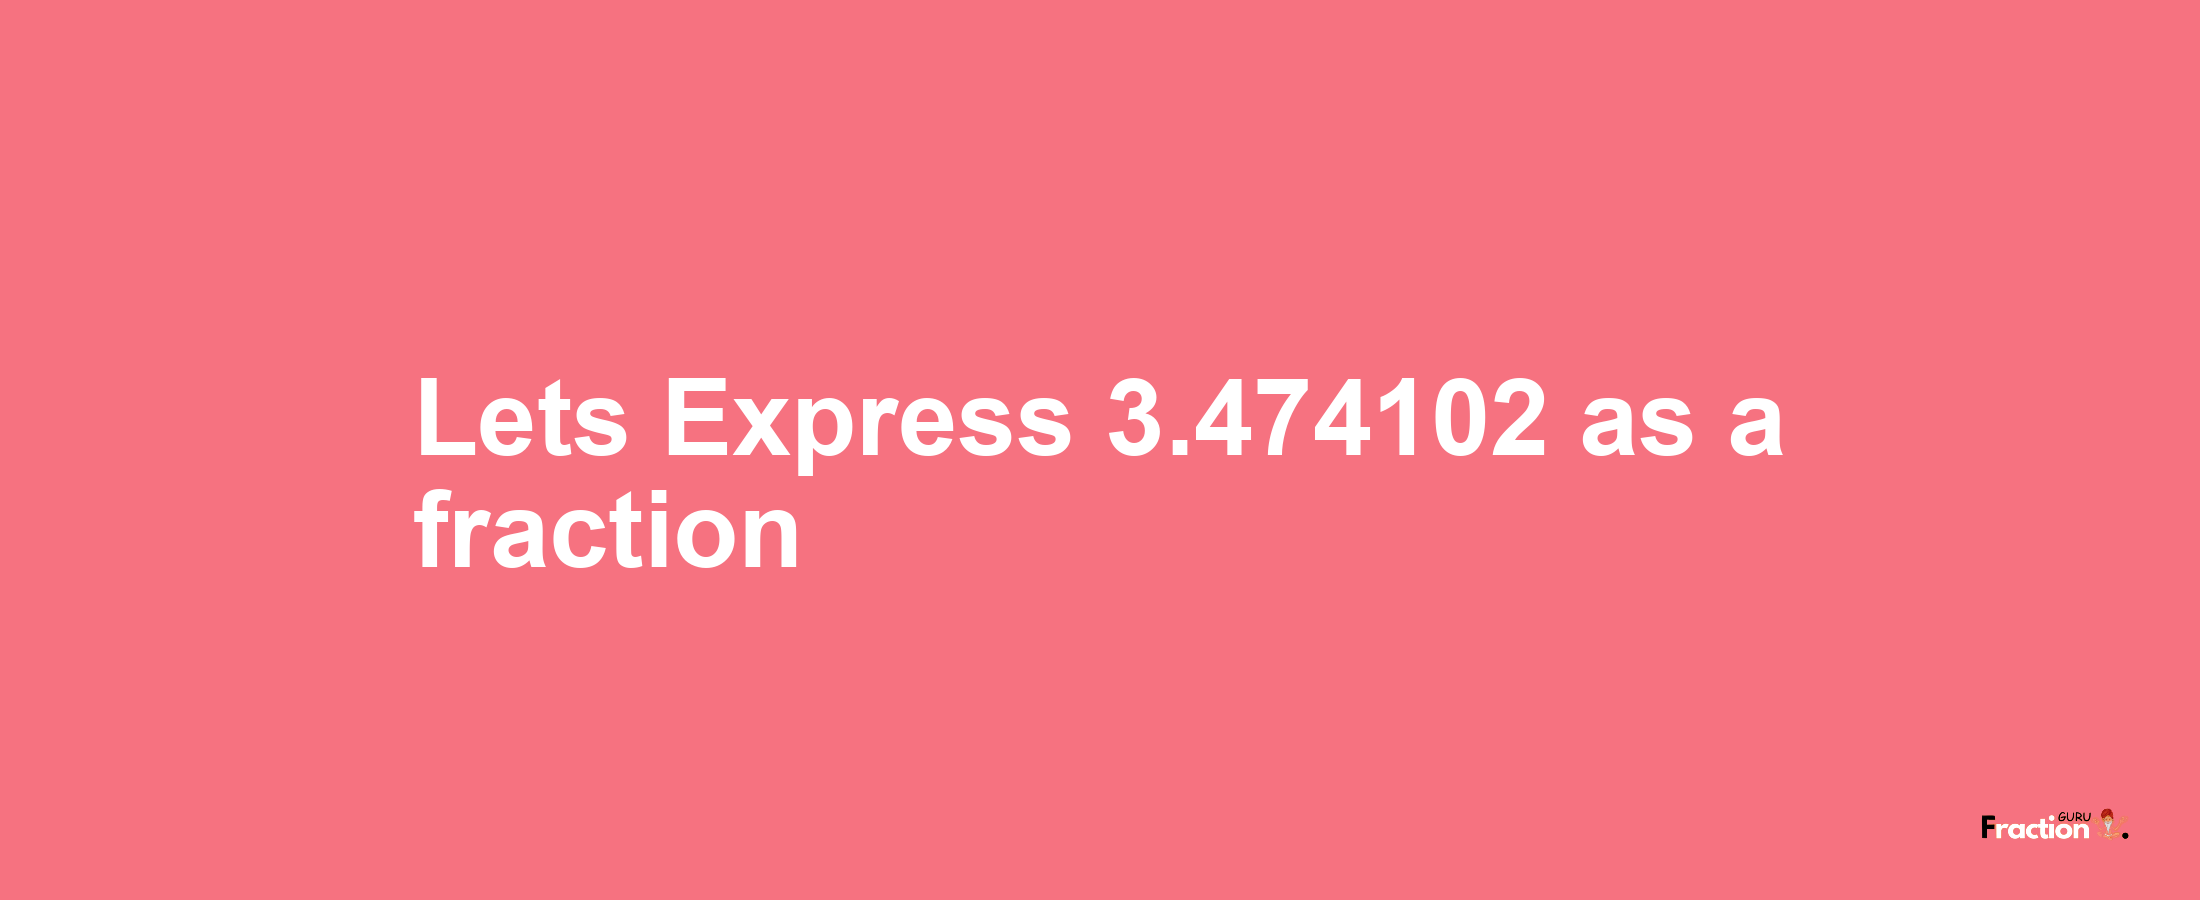 Lets Express 3.474102 as afraction